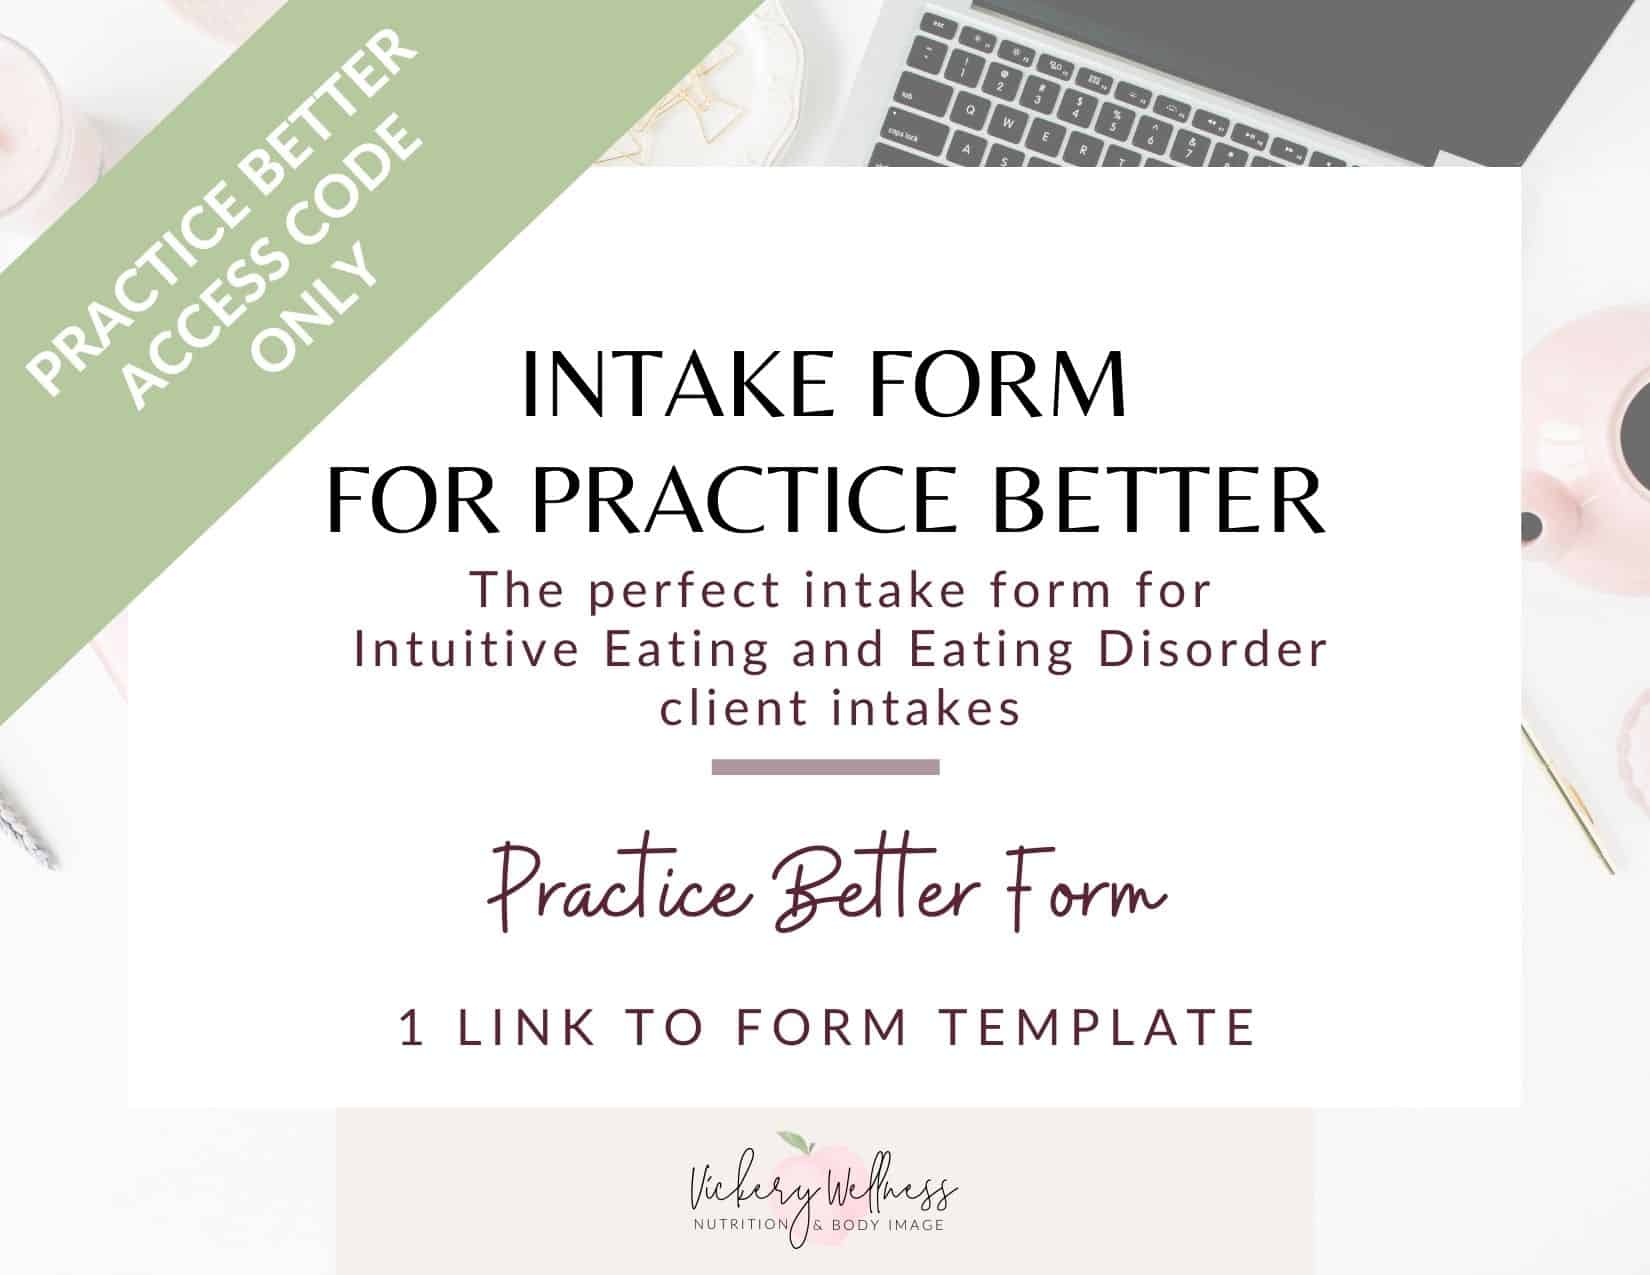 Intake Form for Practice Better